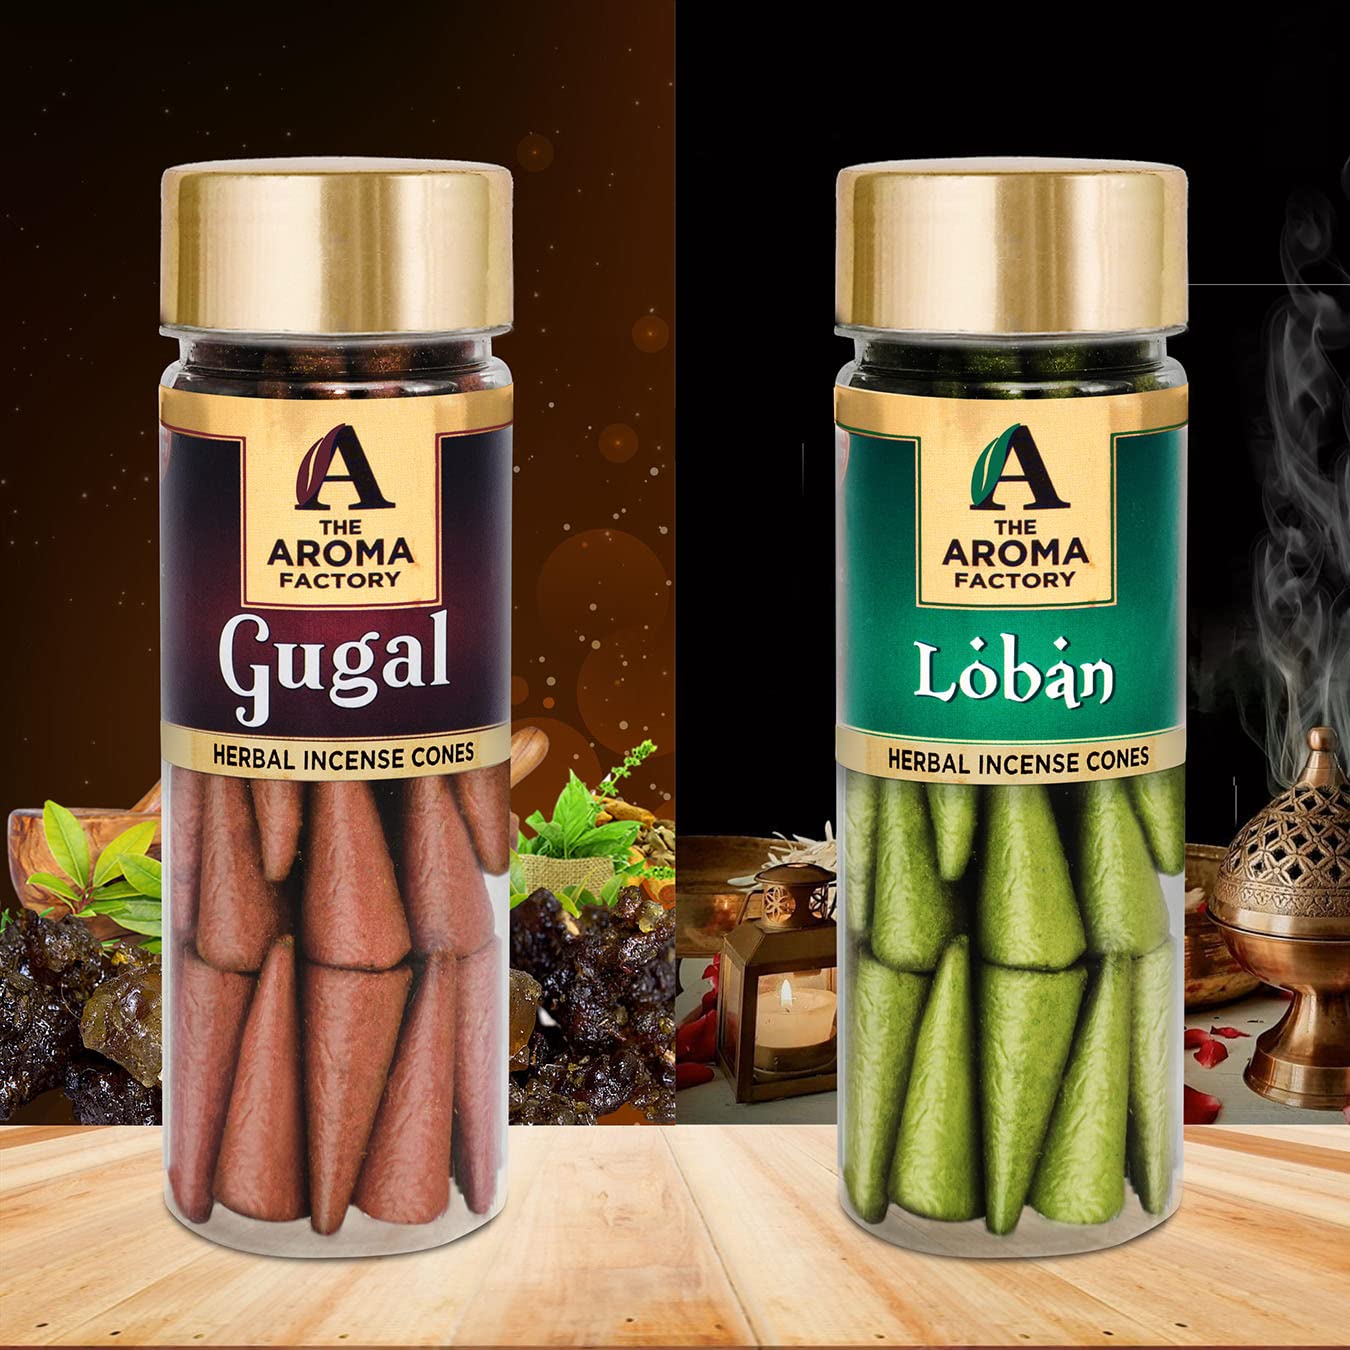 The Aroma Factory Incense Dhoop Cone for Pooja, Gugal & Loban (100% Herbal & 0% Charcoal) 2 Bottles x 30 Cones